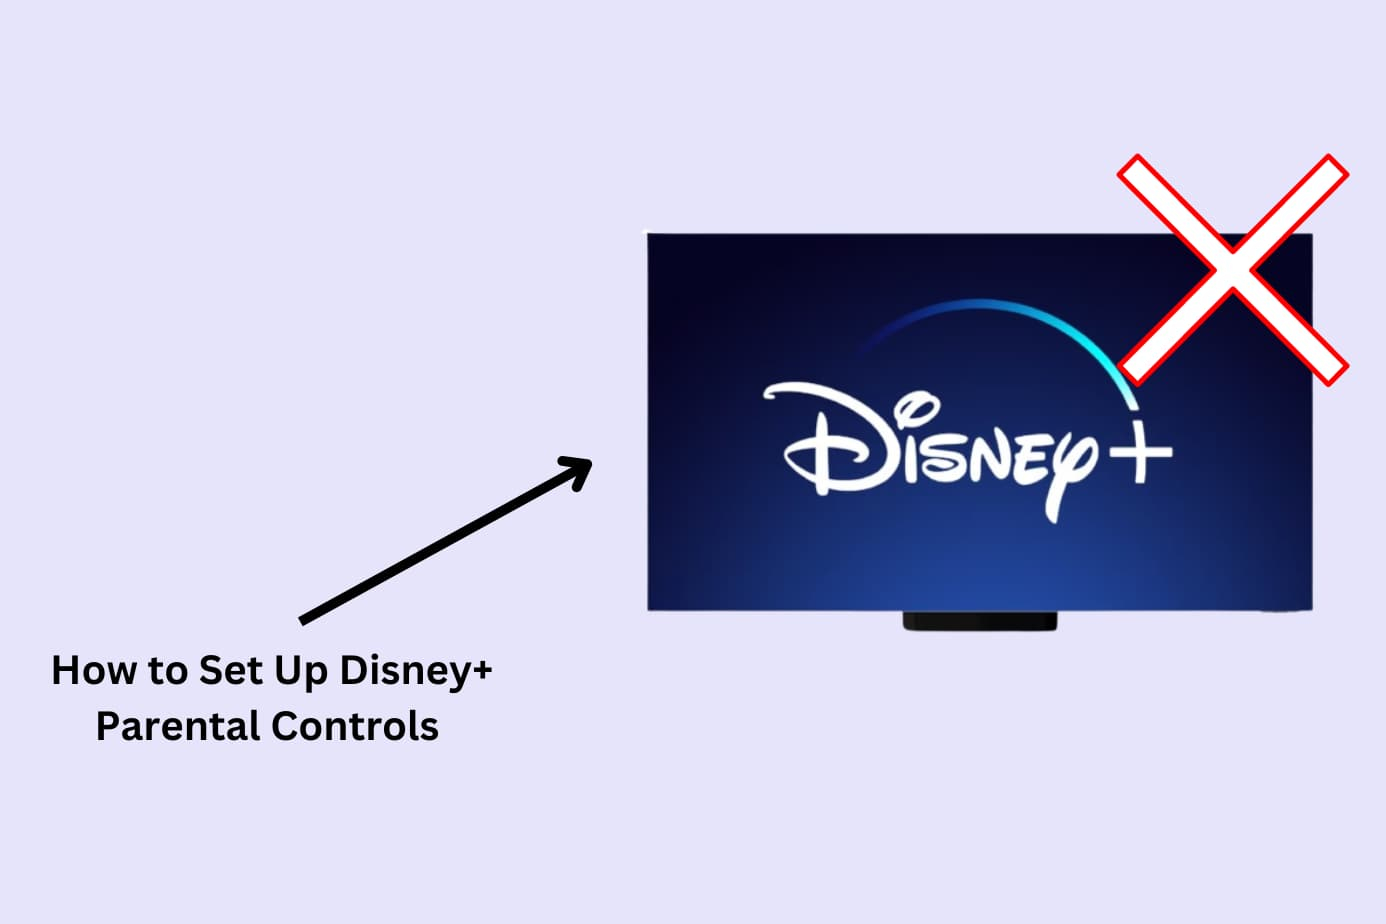 Disney Plus Let's You Disable Background Video. Here's How to Do It.